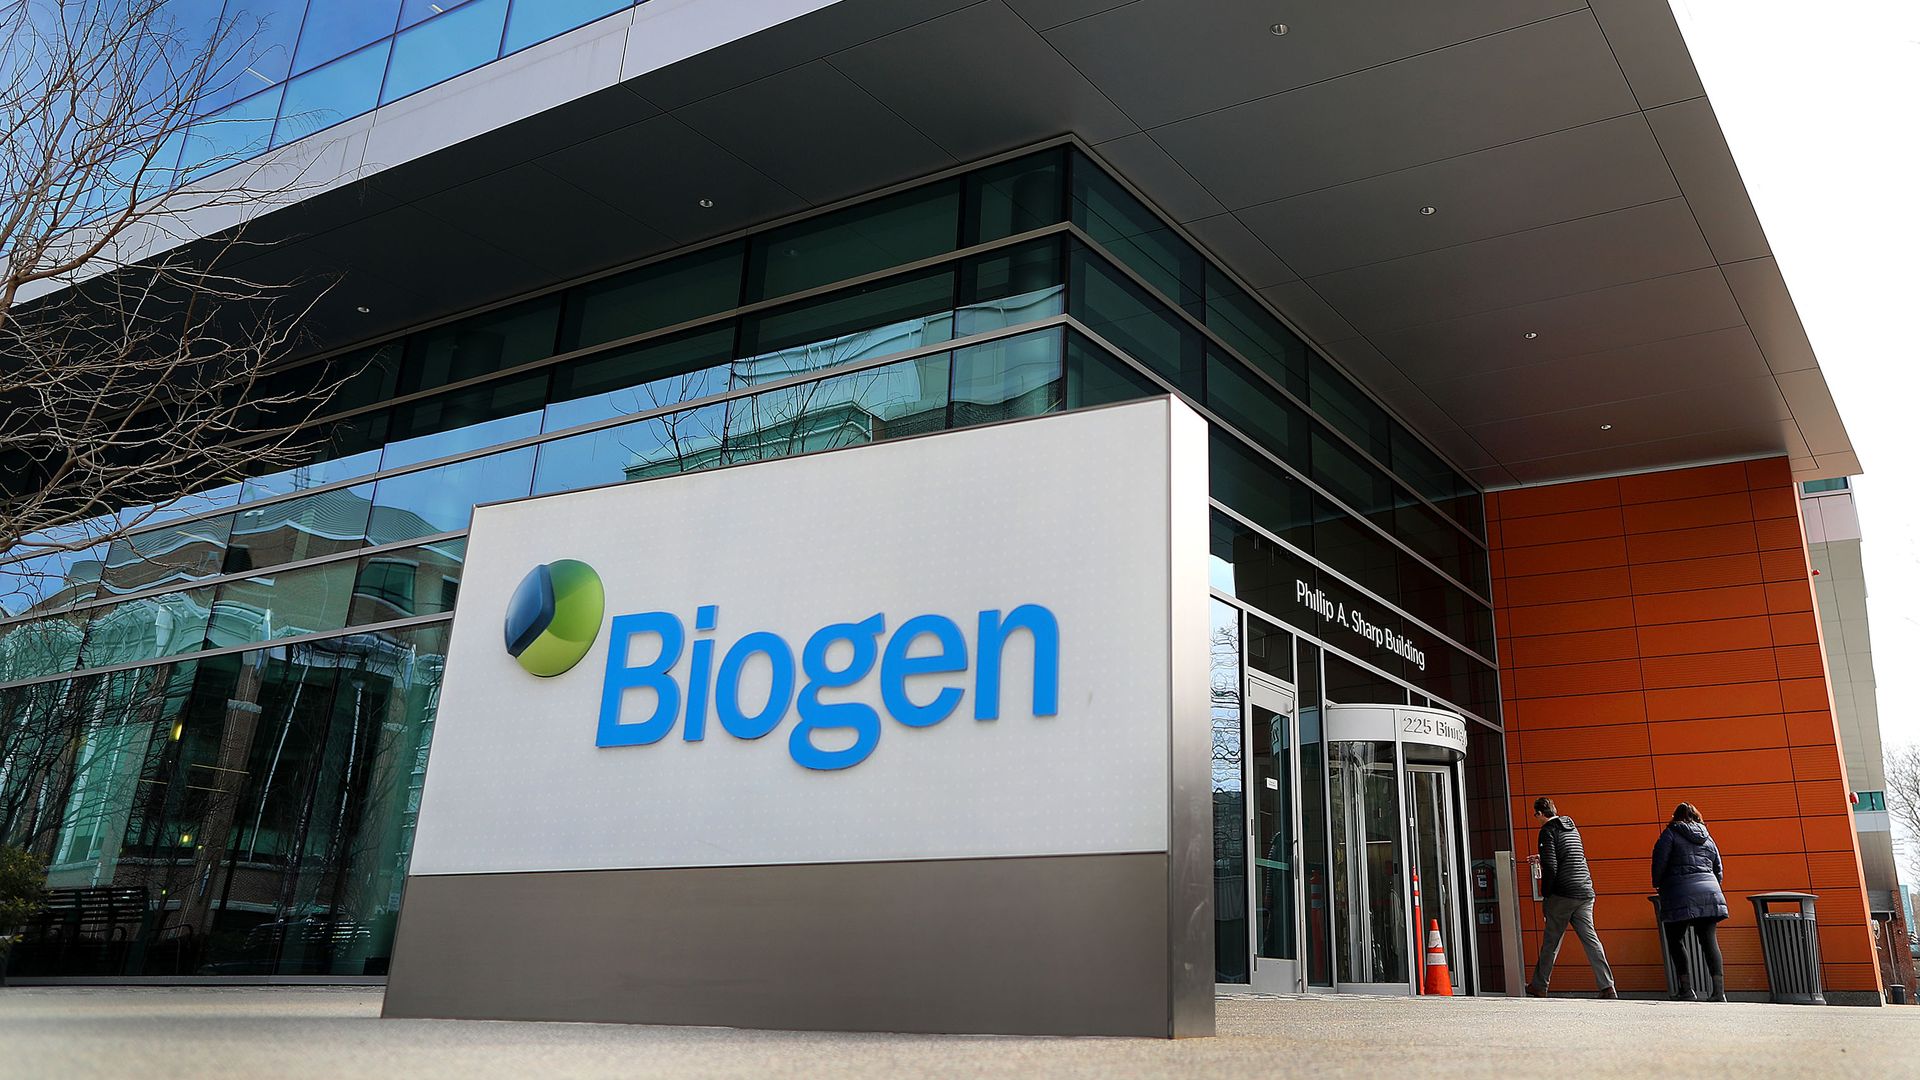 A Biogen sign in front of its headquarters building.